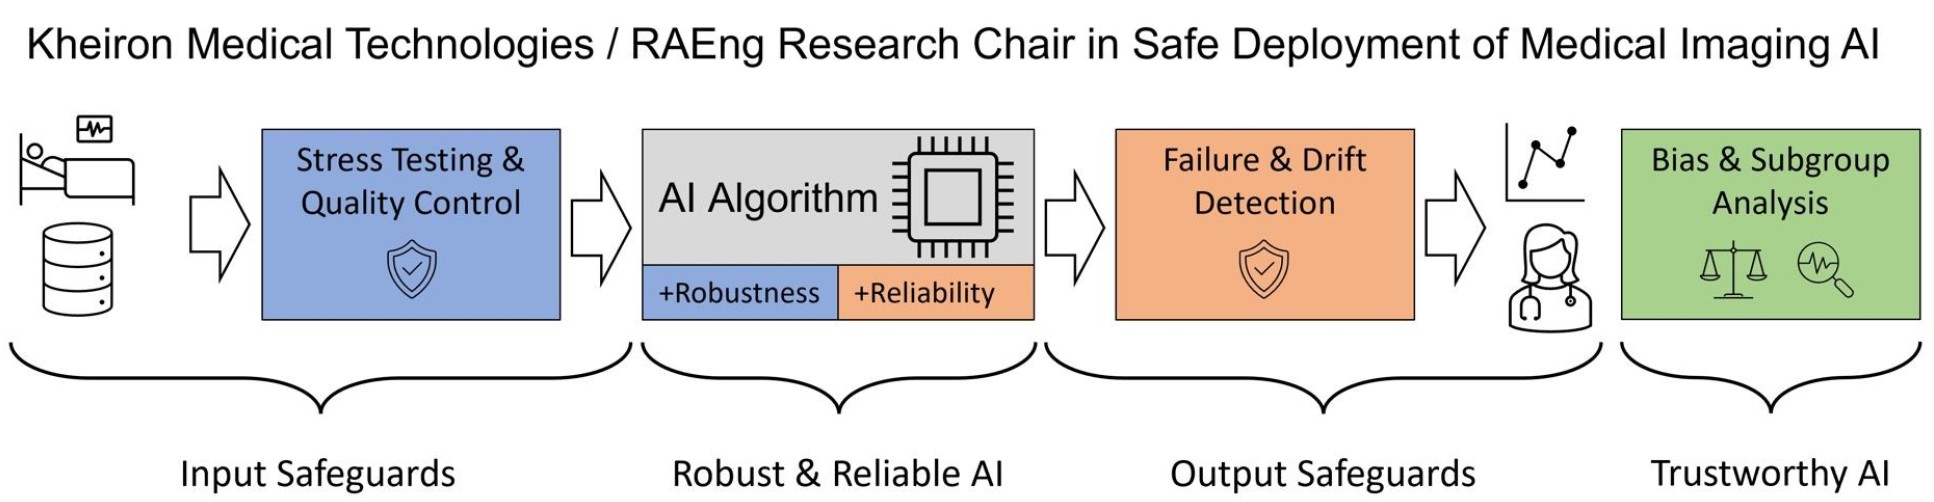 Overview process chart of collaboration between Kheiron Medical Technologies and RAEng research chair collaboration into safe deployment of medical imaging AI